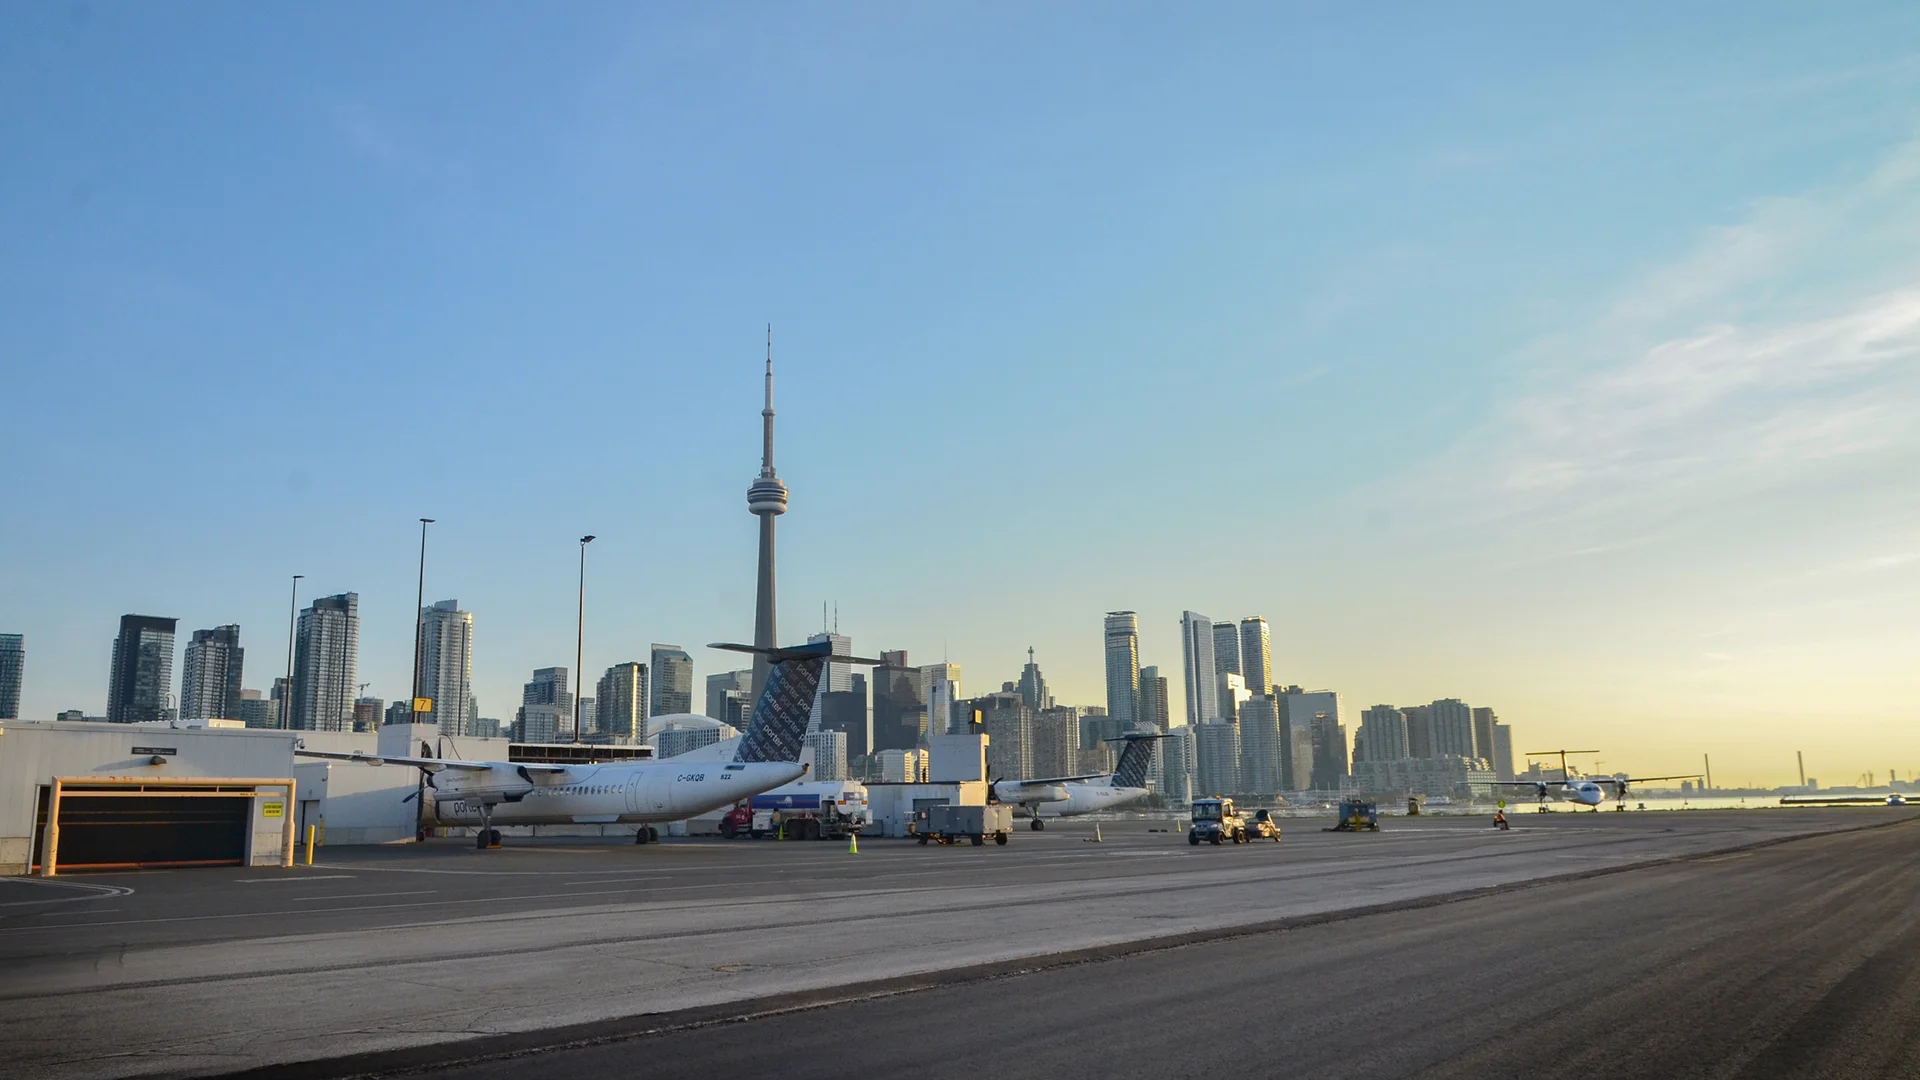 Billy Bishop Toronto City Airport runway with planes and downtown Toronto in background